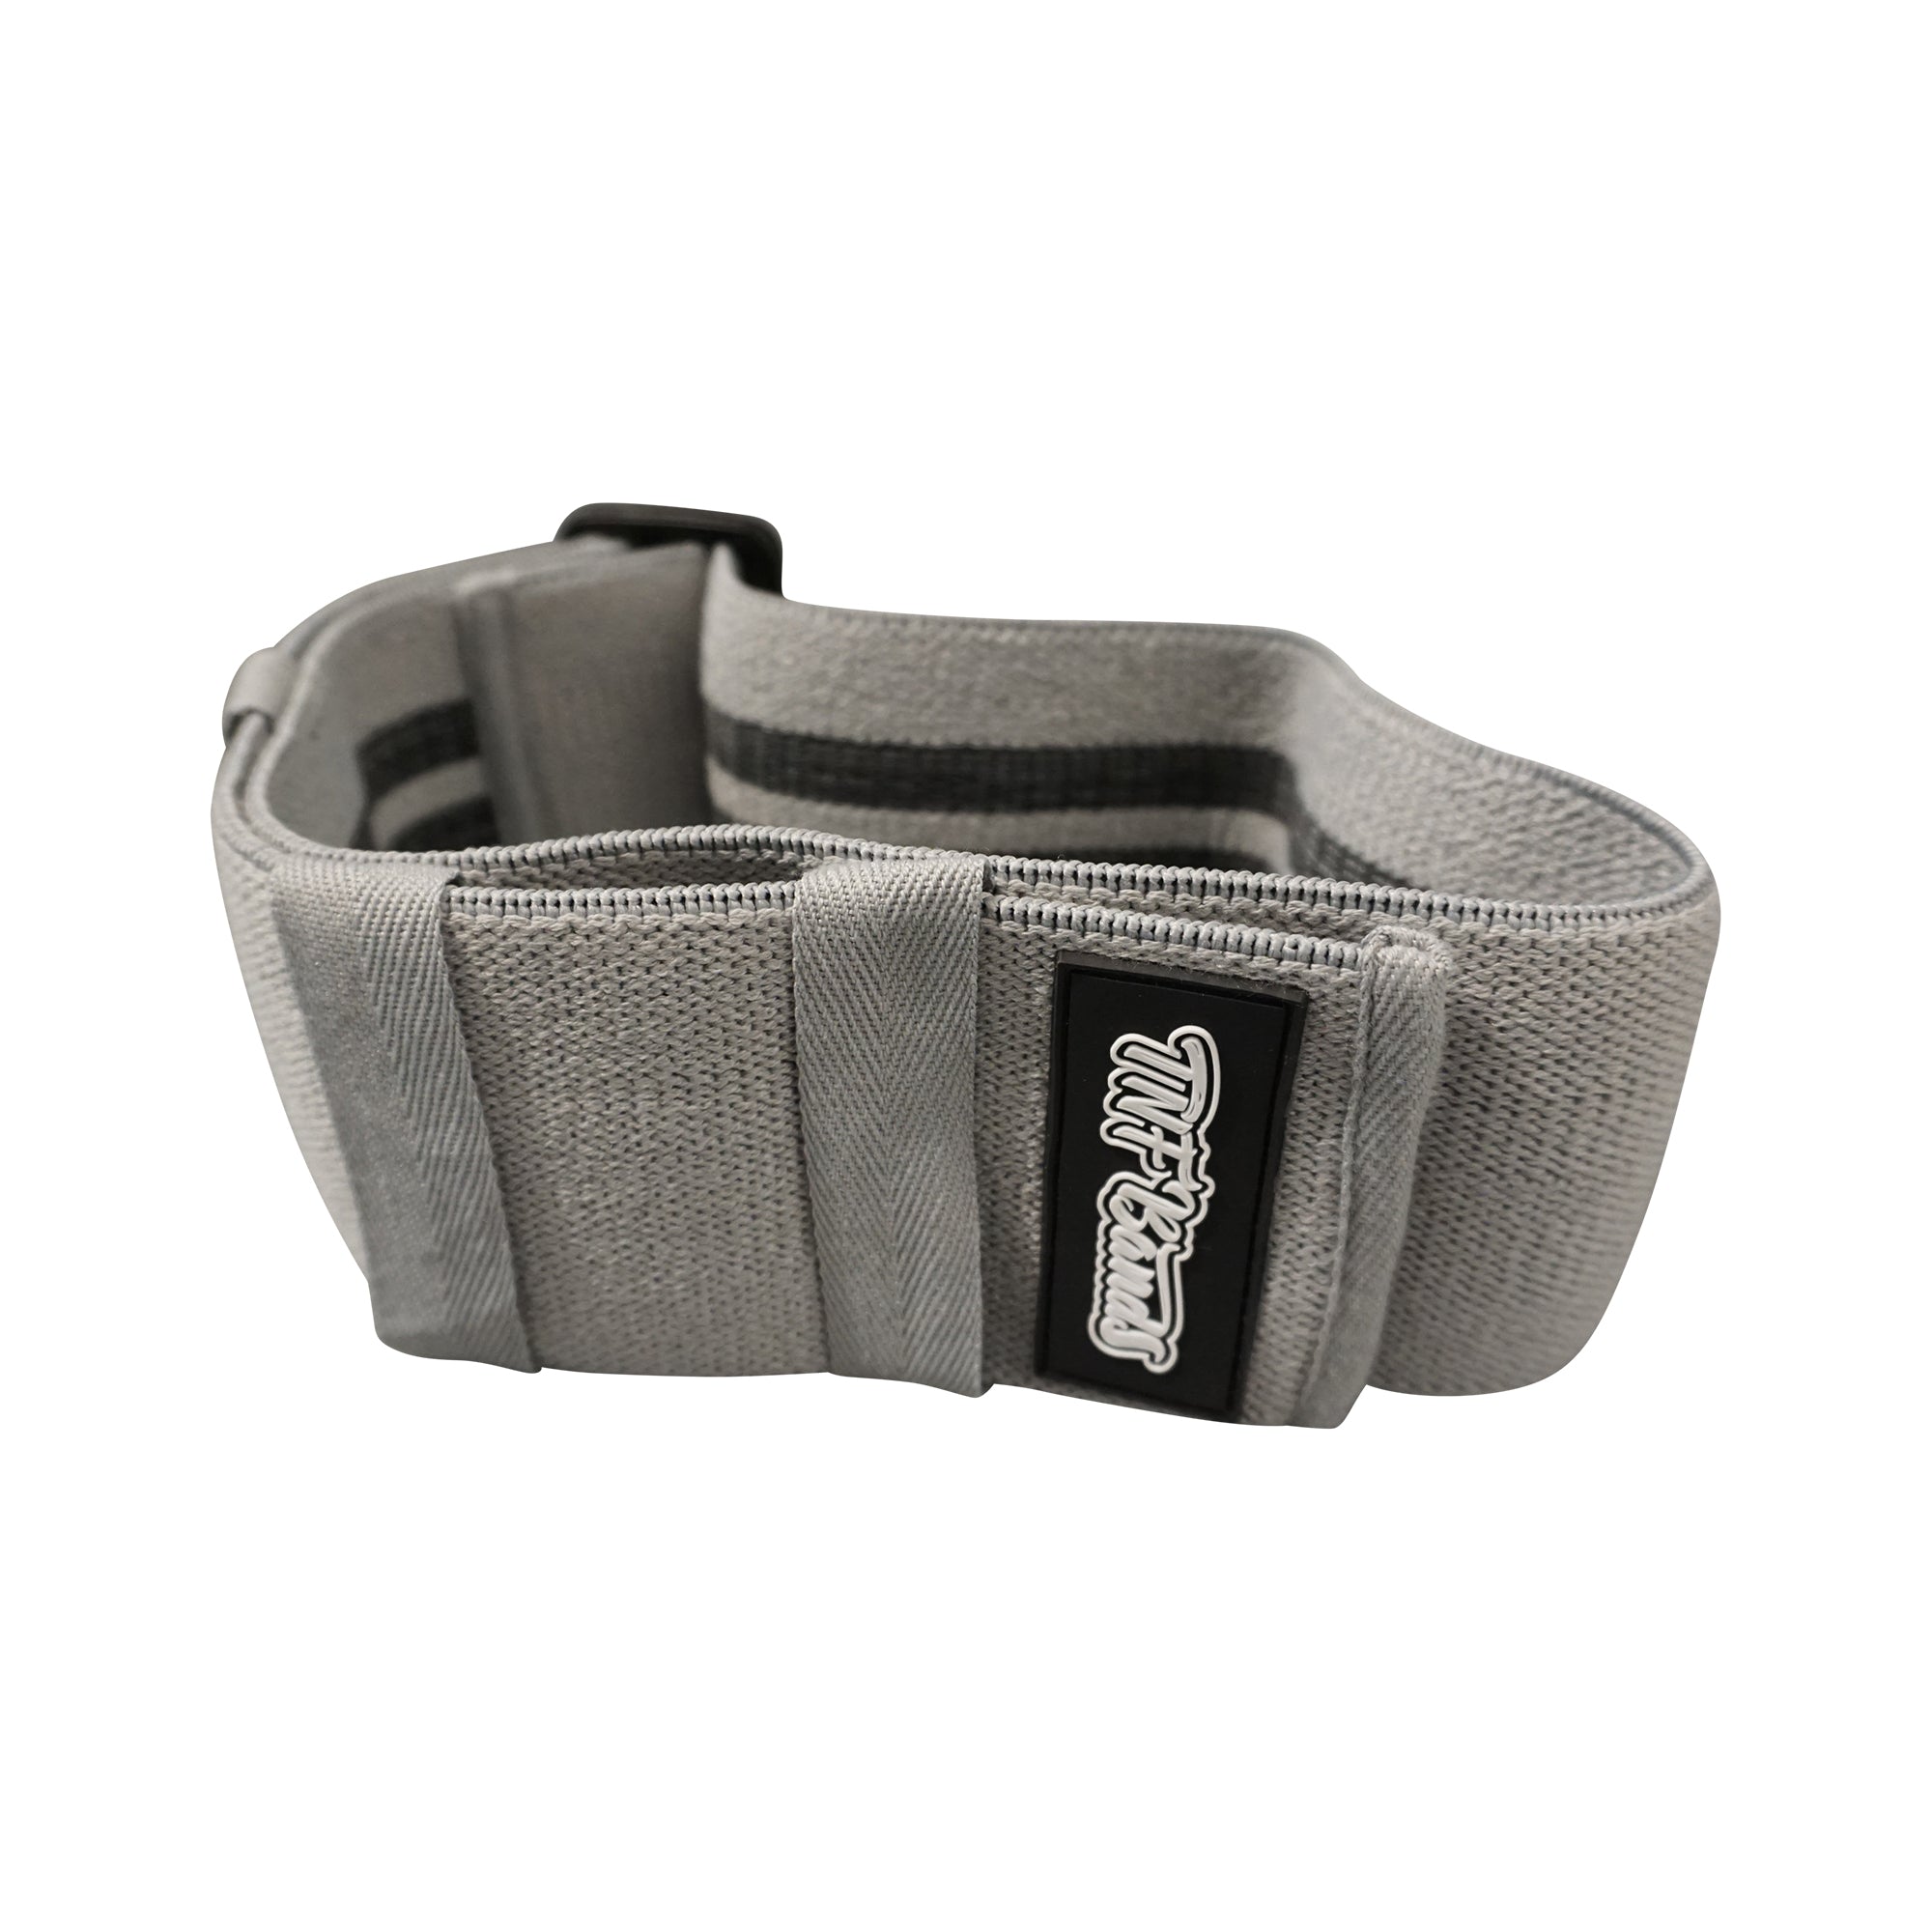 TNF Bands Adjustable Resistance Band (1 band) Fitness Accessories Grey TNF Bands